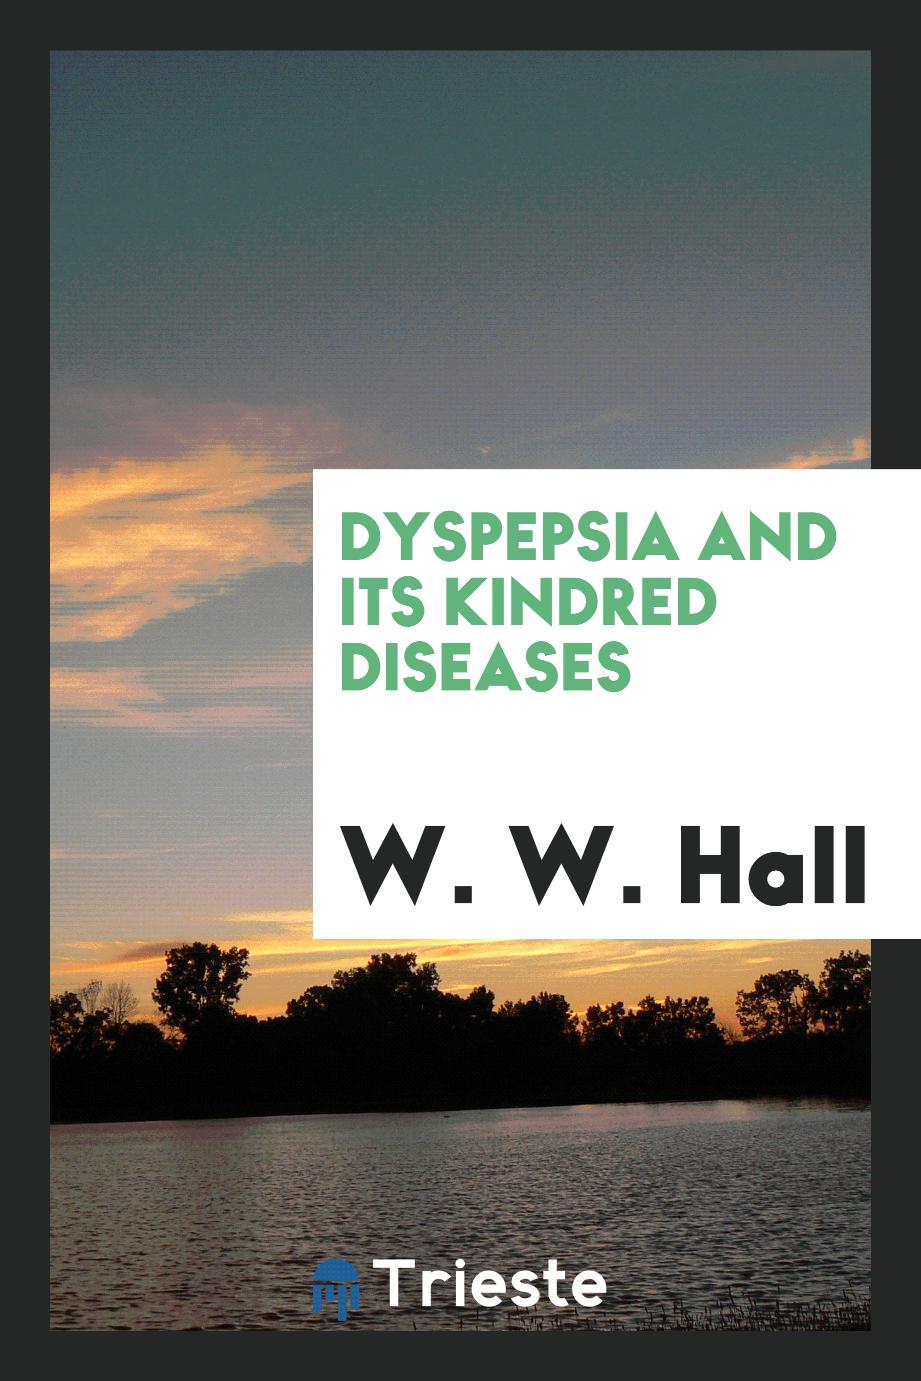 Dyspepsia and Its Kindred Diseases